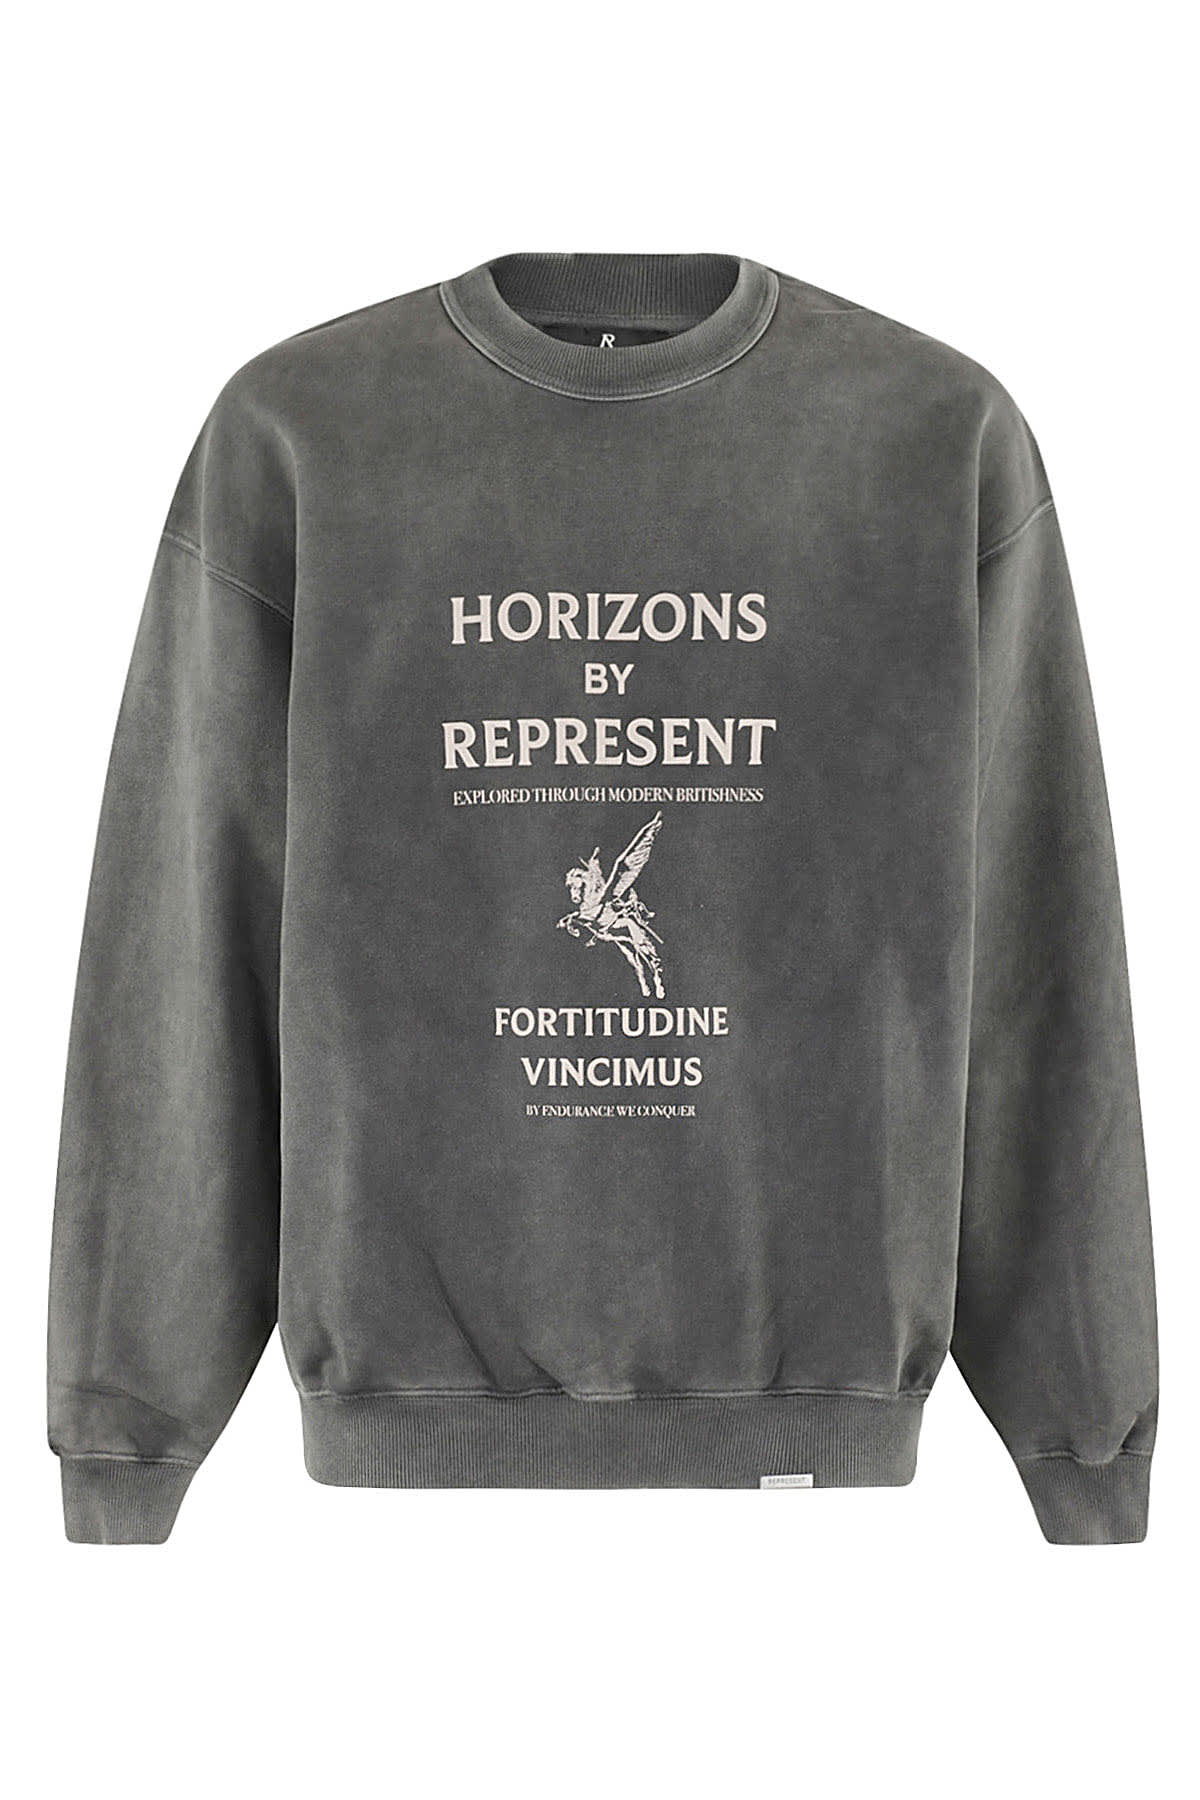 Represent Horizons Sweater In Aged Black